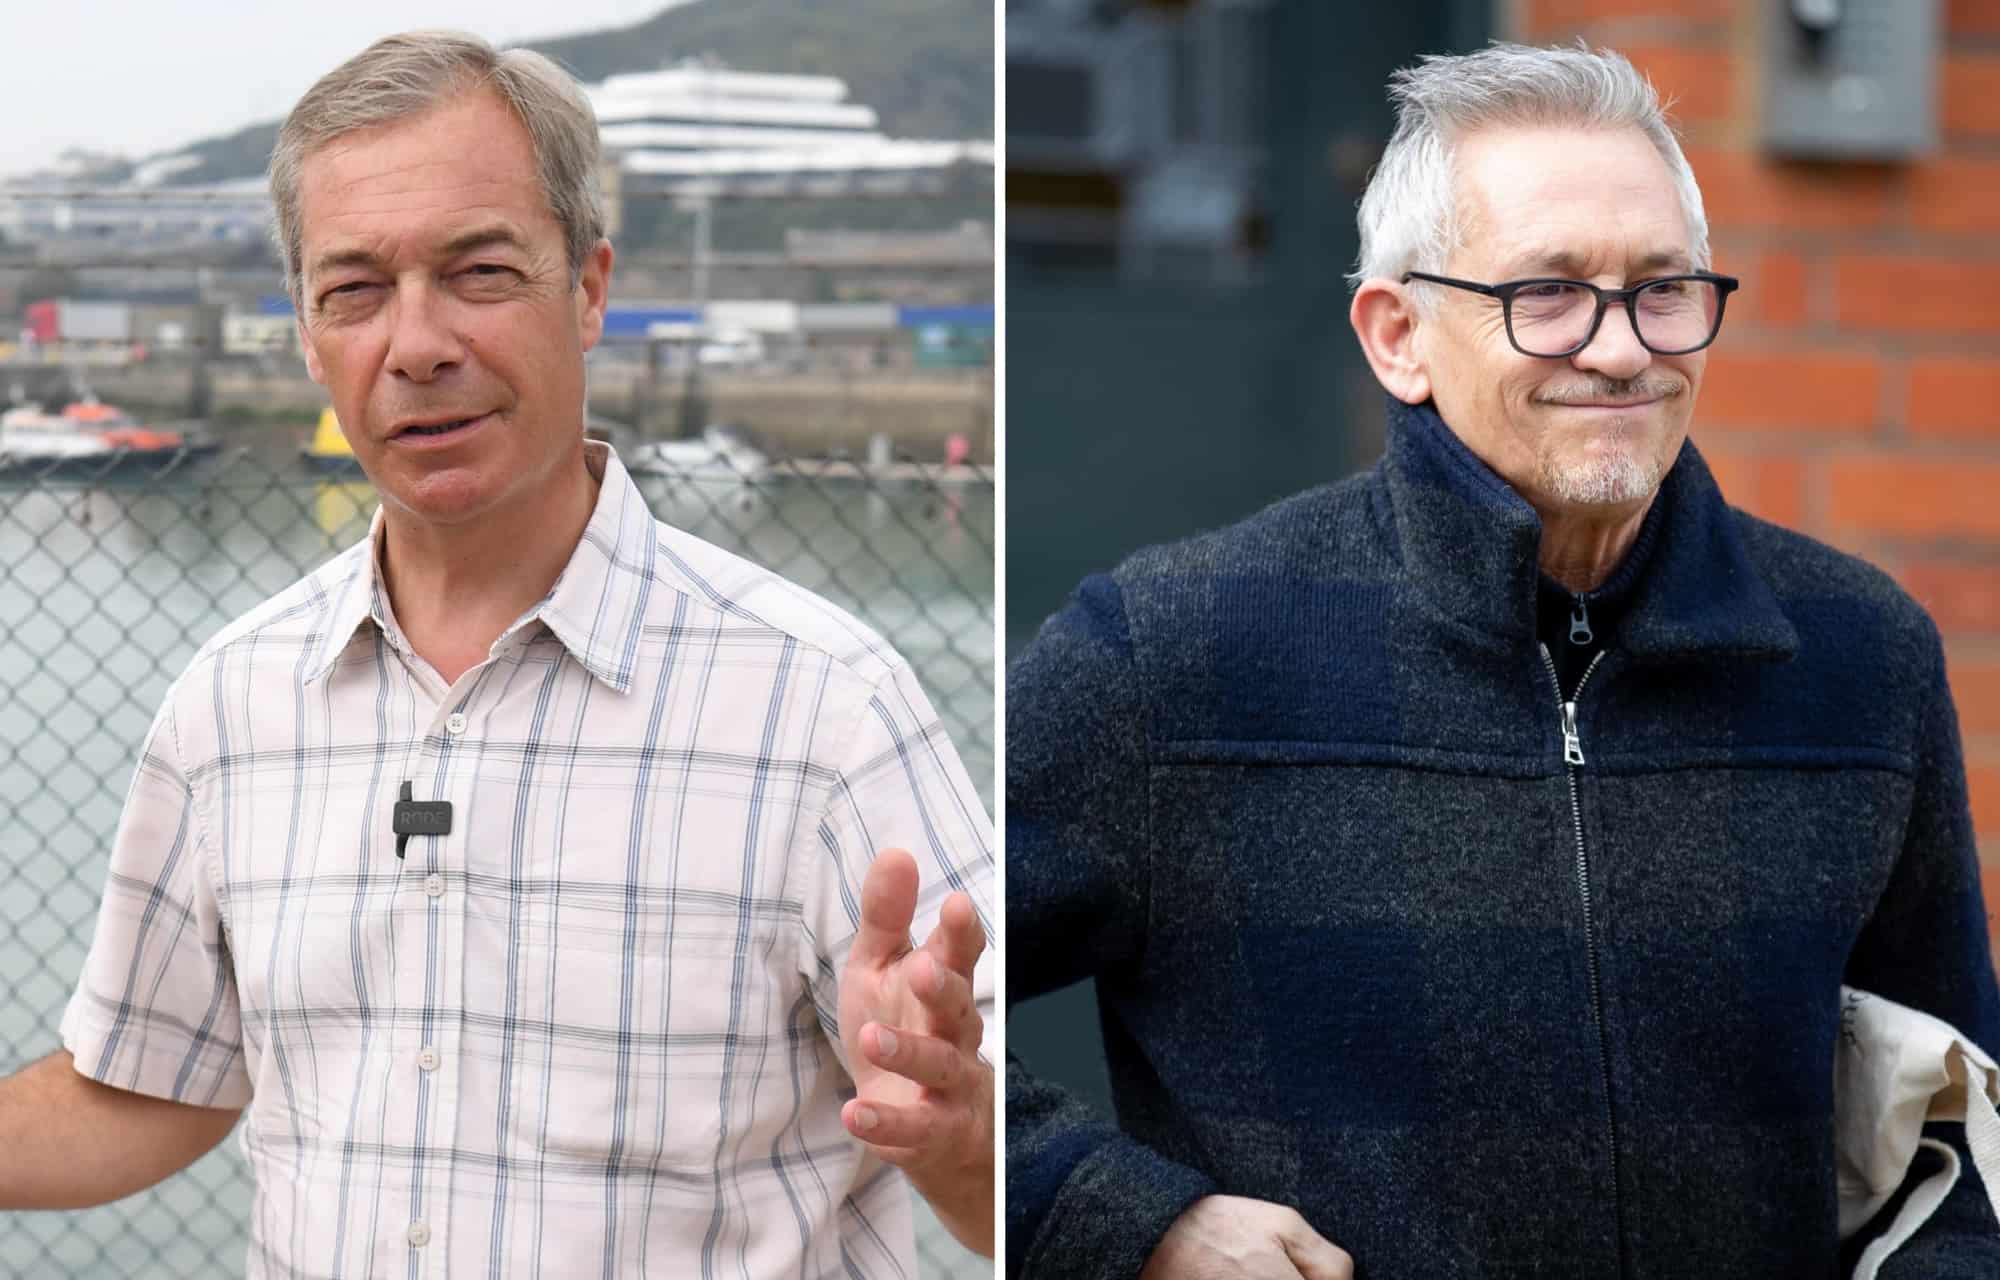 Irony laid to rest as Nigel Farage accuses Gary Lineker of spreading hate